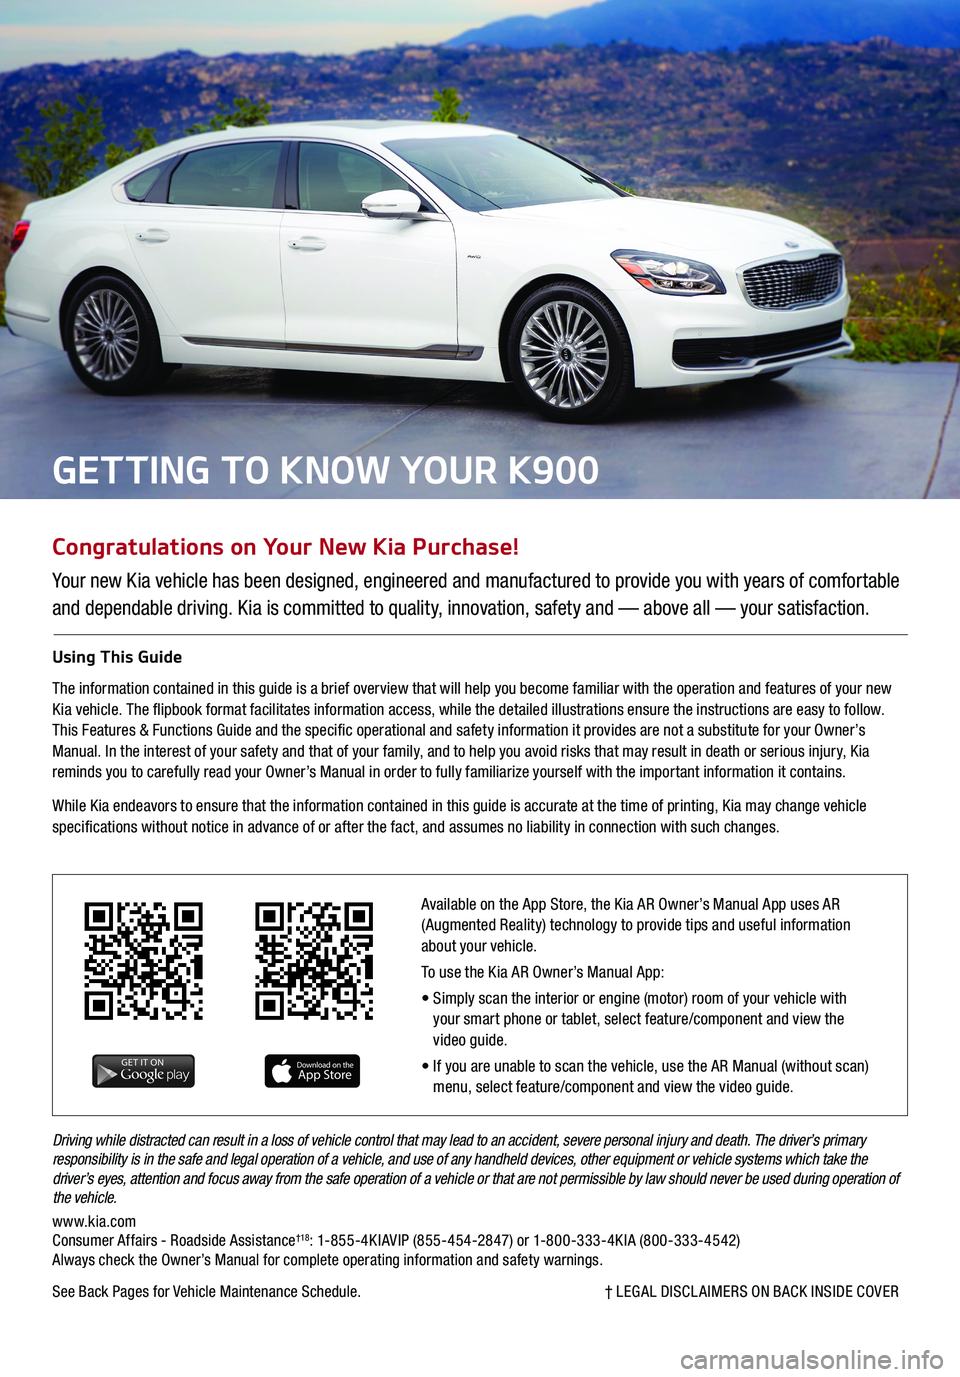 KIA K900 2019  Features and Functions Guide Congratulations on Your New Kia Purchase!
Your new Kia vehicle has been designed, engineered and manufactured to provide you with years of comfortable 
and dependable driving. Kia is committed to qual